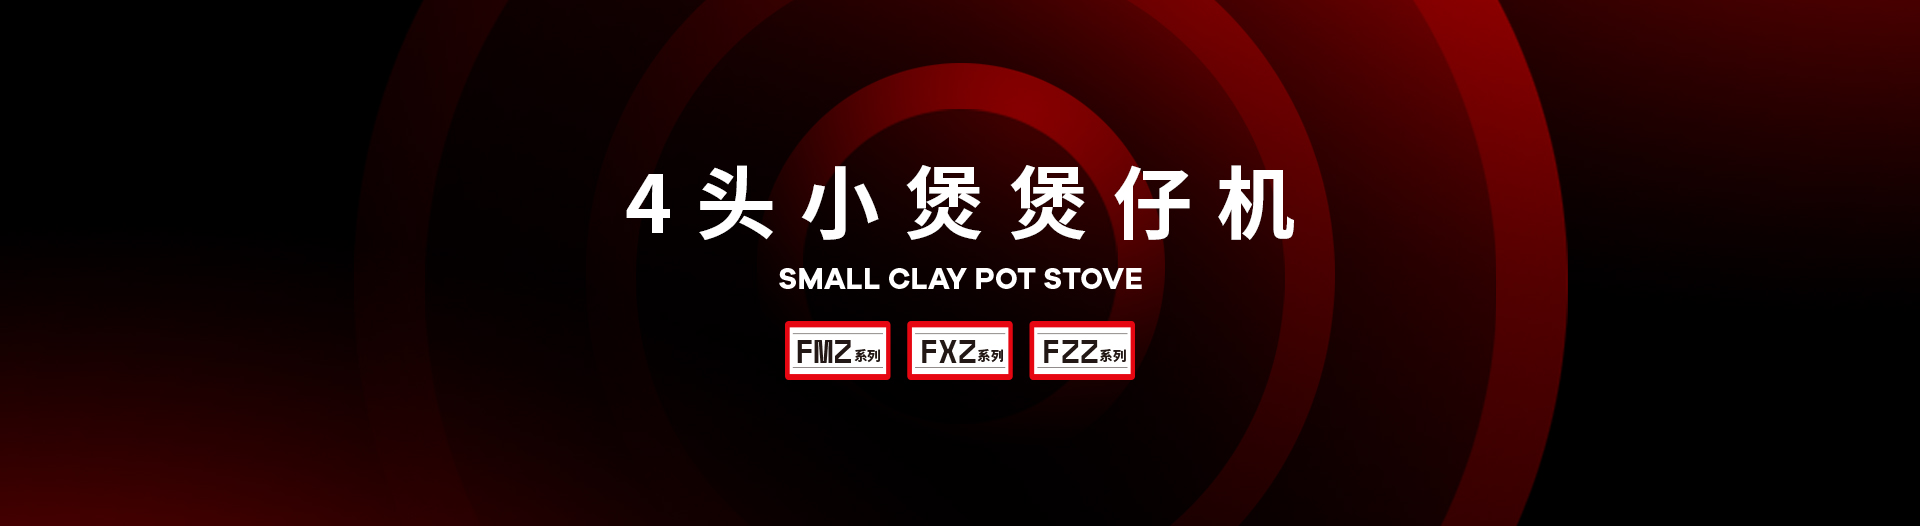 sinswey_sinswey_engineering_product_small_clay_pot_stove_banner.jpg